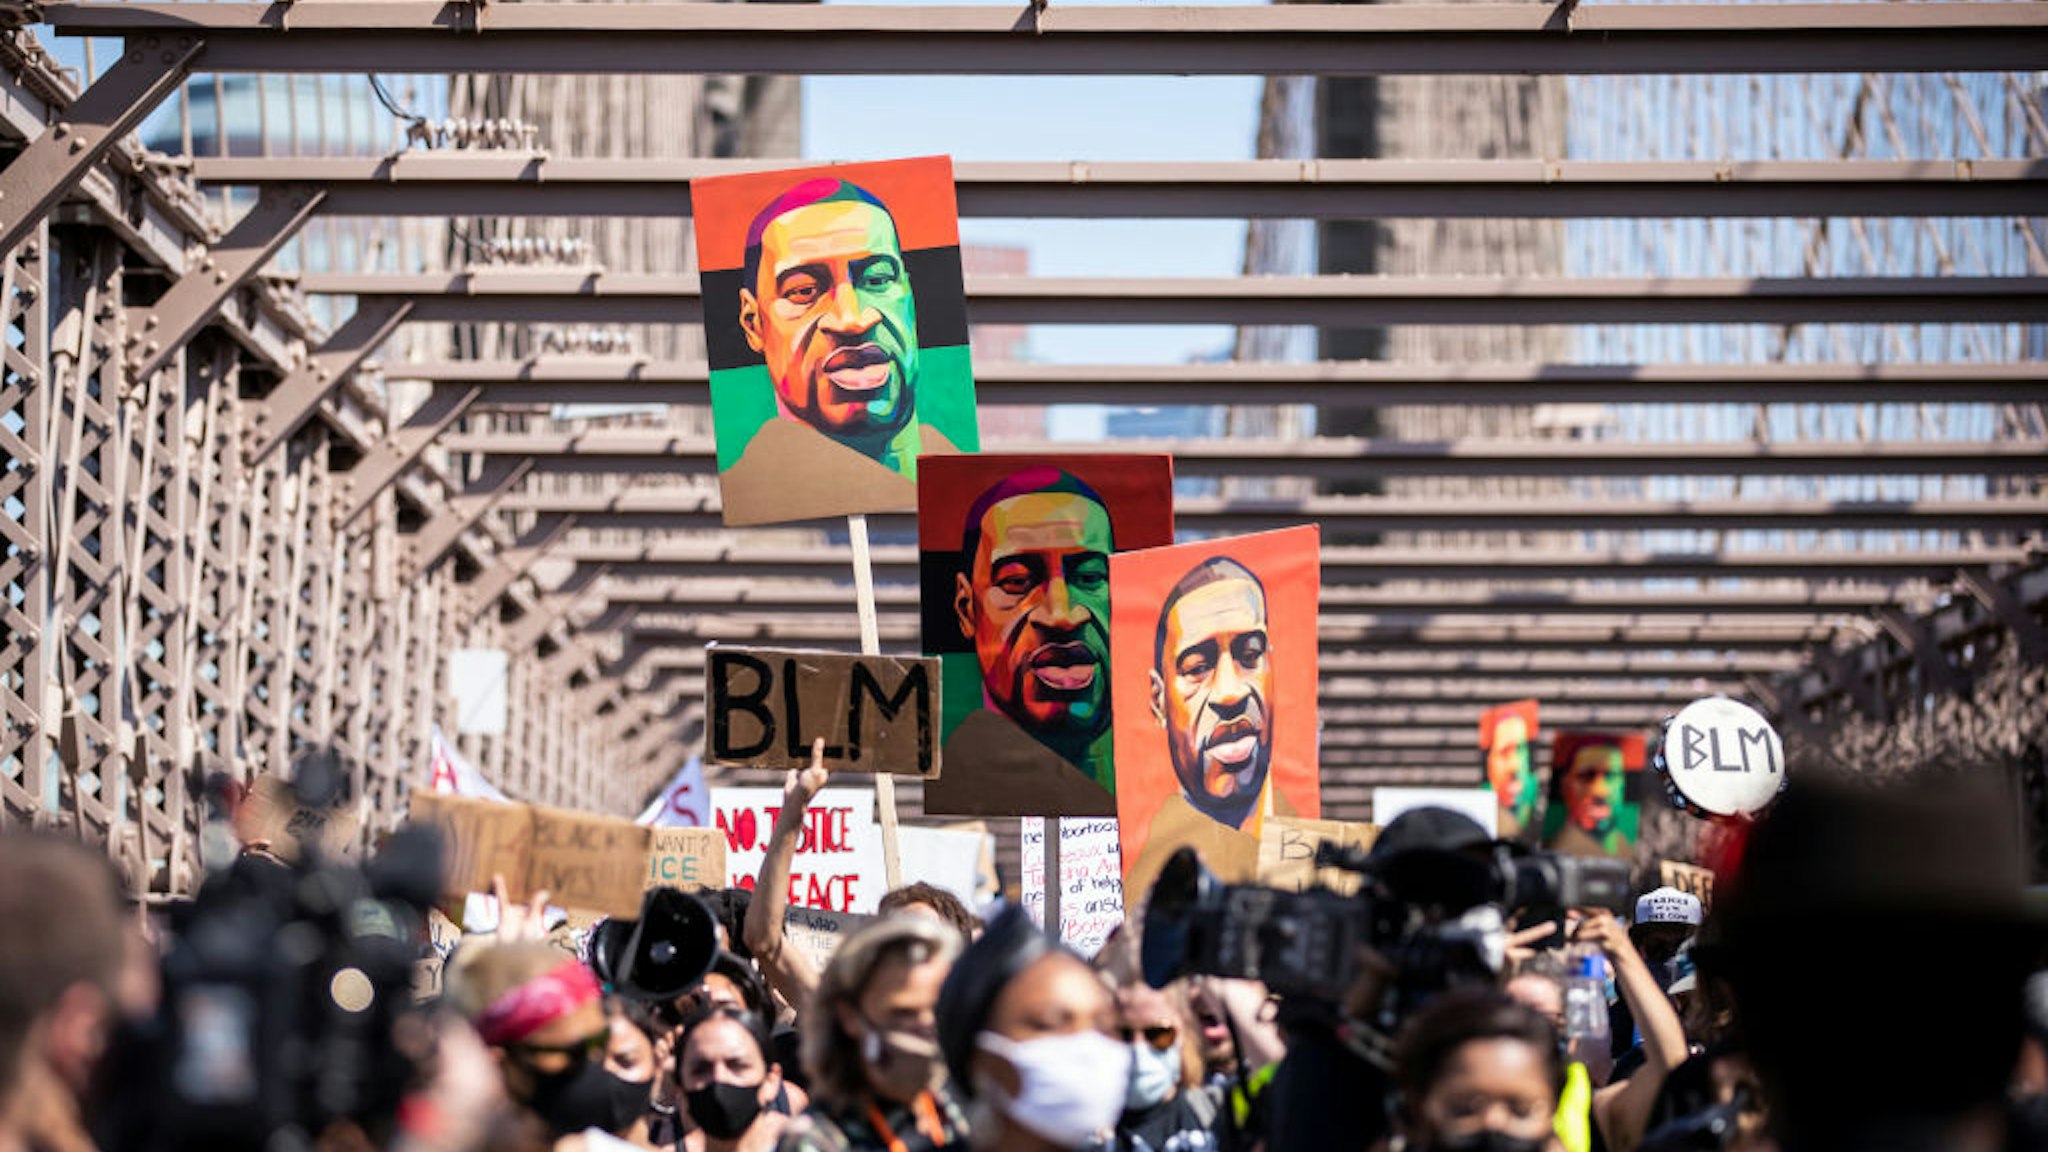 MANHATTAN, NY - JUNE 19: Thousands of protesters walk in a peaceful protest across the Brooklyn Bridge holding signs that read, "BLM" and three painted portraits of George Floyd with the Brooklyn Bridge Arch in the background. This was part of the Unite NY 2020, Bringing all of New York Together rally and march as protests that happened around the country to celebrate Juneteenth day which marks the end of slavery in the United States. Protesters continue taking to the streets across America and around the world after the killing of George Floyd at the hands of a white police officer Derek Chauvin that was kneeling on his neck during for eight minutes, was caught on video and went viral. During his arrest as Floyd pleaded, "I Can't Breathe". The protest are attempting to give a voice to the need for human rights for African American's and to stop police brutality against people of color. They are also protesting deep-seated racism in America. Many people were wearing masks and observing social distancing due to the coronavirus pandemic. Photographed in the Manhattan Borough of New York on June 19, 2020, USA.